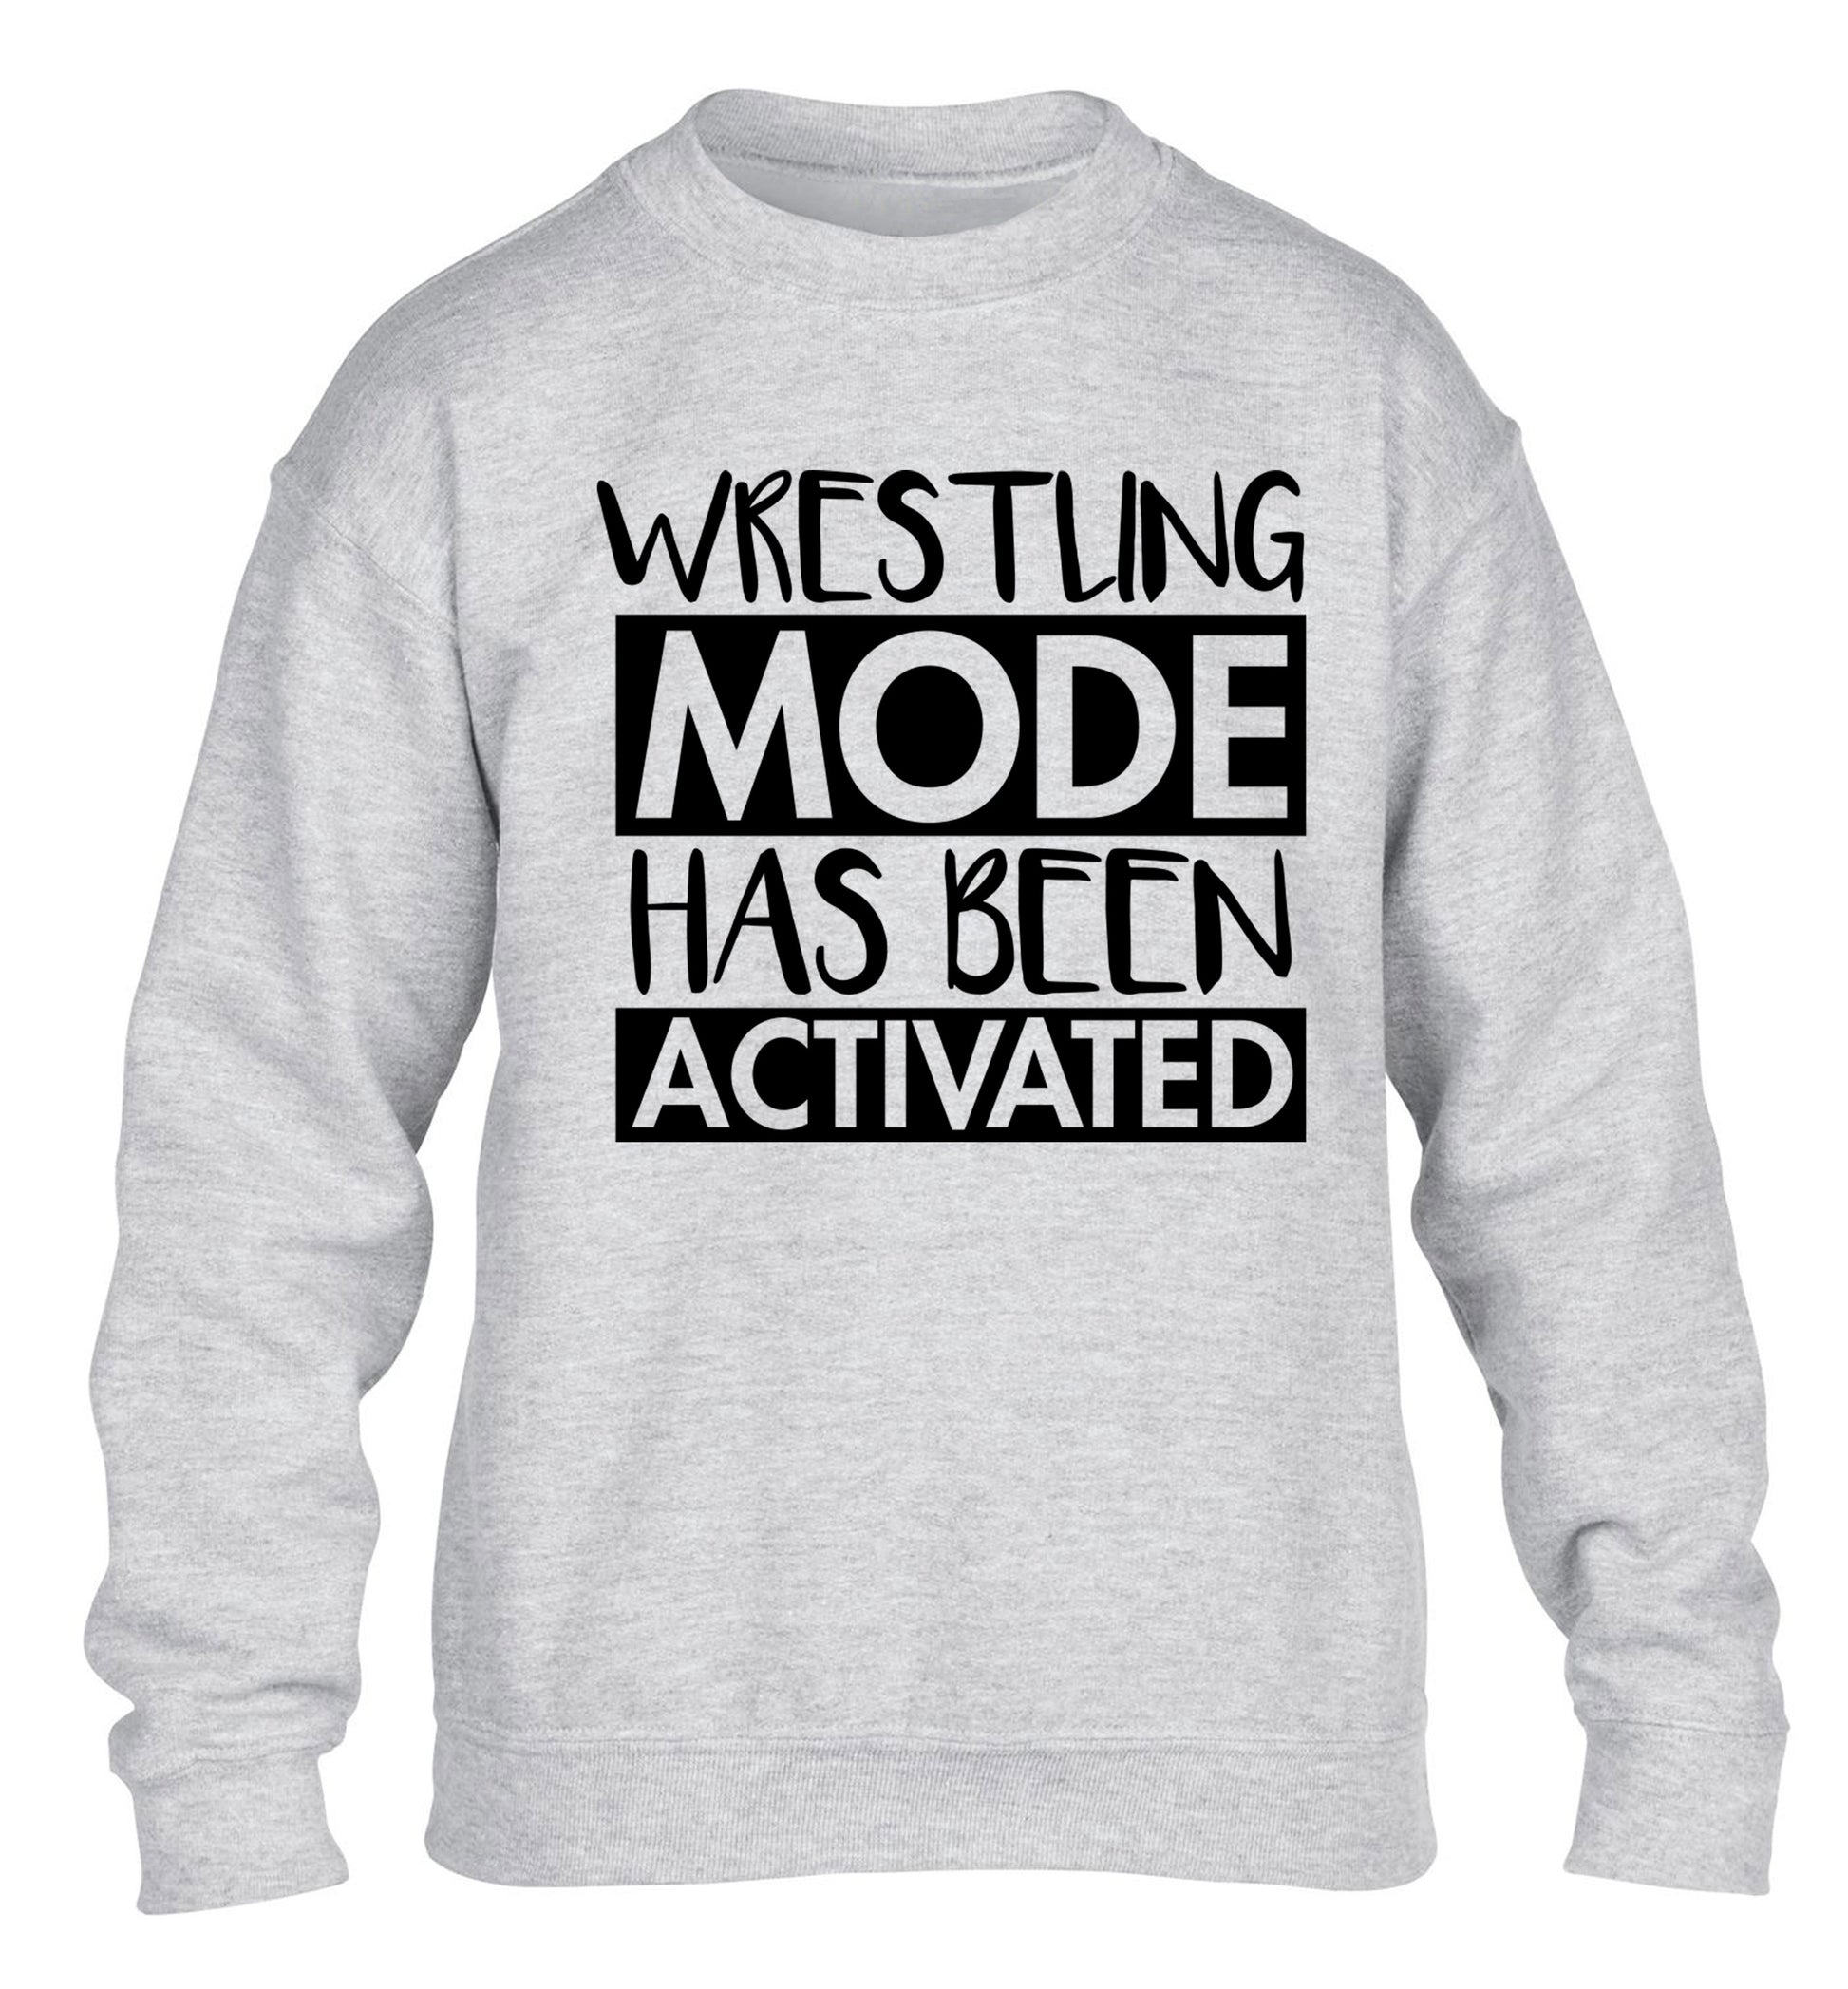 Wresting mode activated children's grey sweater 12-14 Years